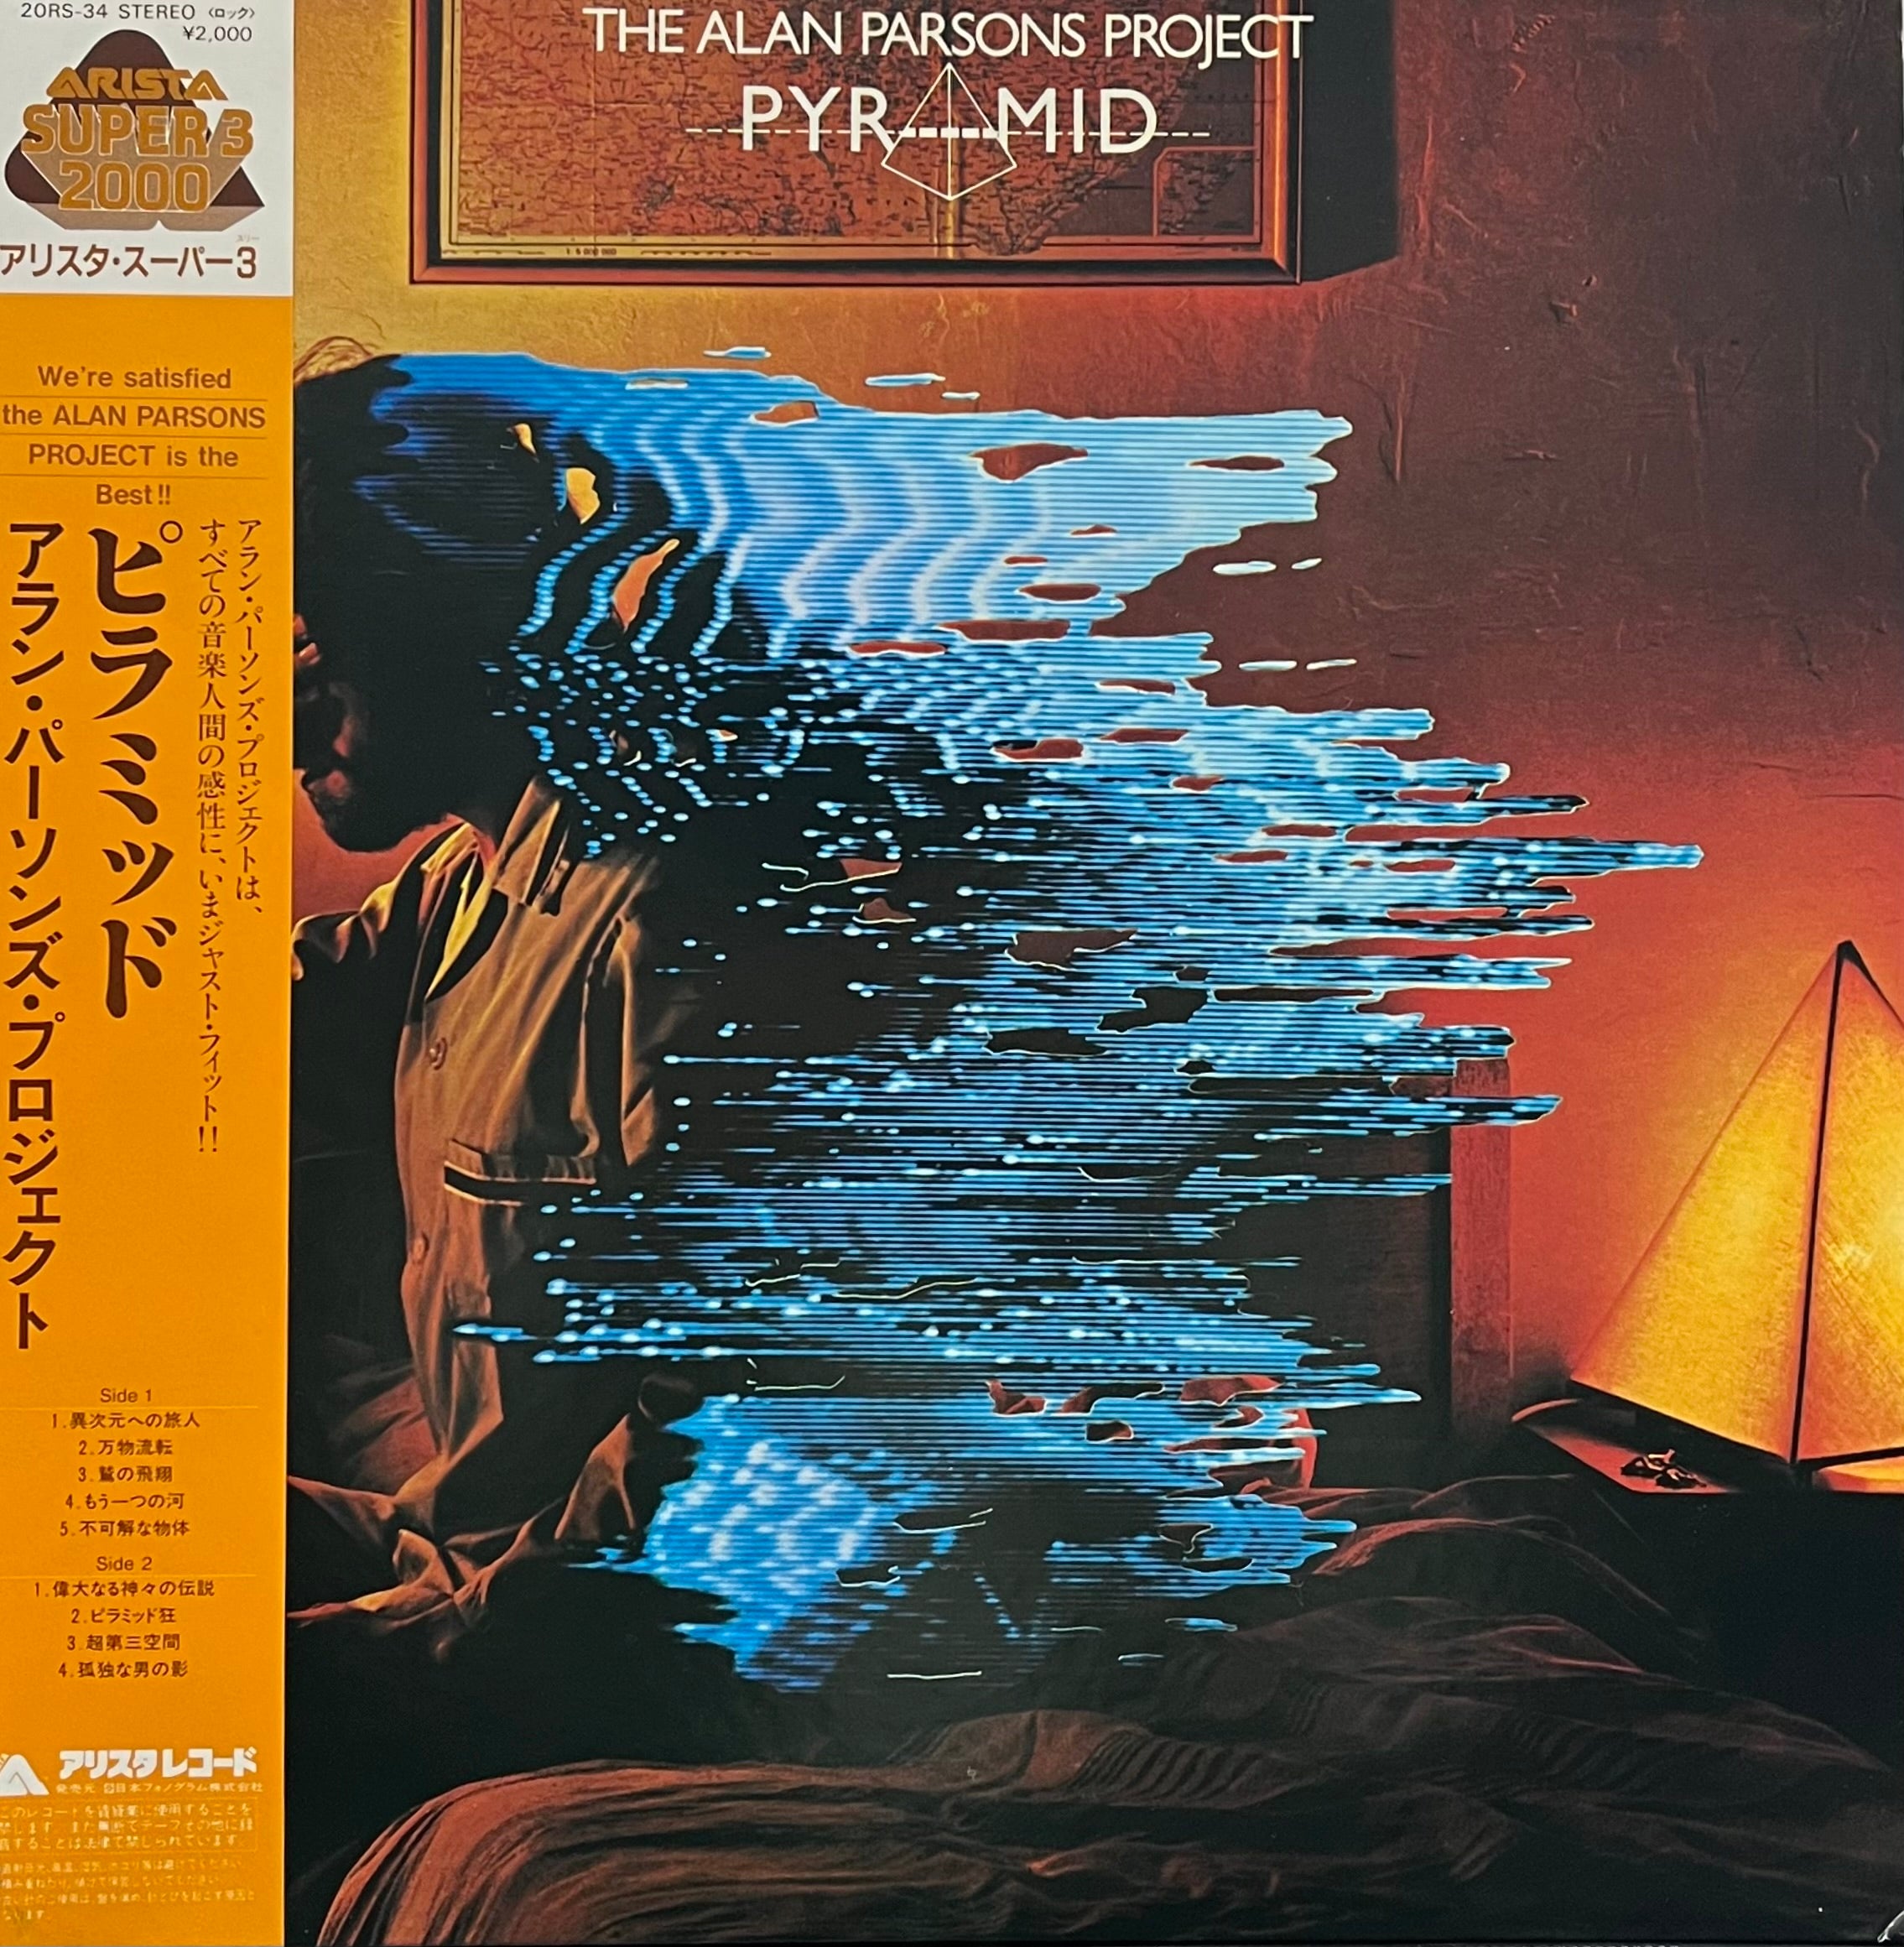 ALAN PARSONS PROJECT / Pyramid (Arista – 20RS-34